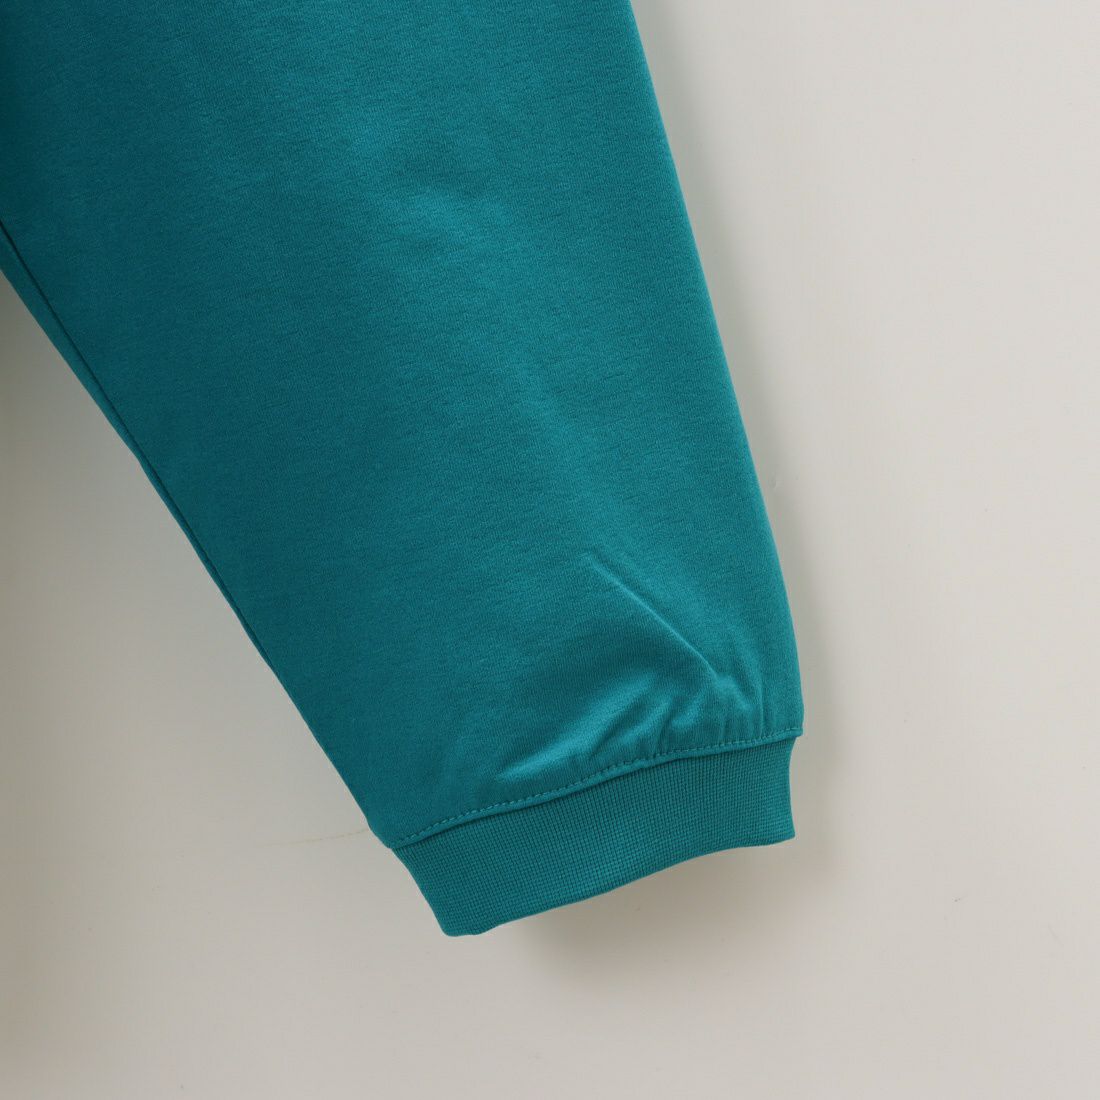 Jeans Factory Clothes [ジーンズファクトリークローズ] AIR POLY天竺クルーネックTシャツ [JFC-231-011] TURQUOISE